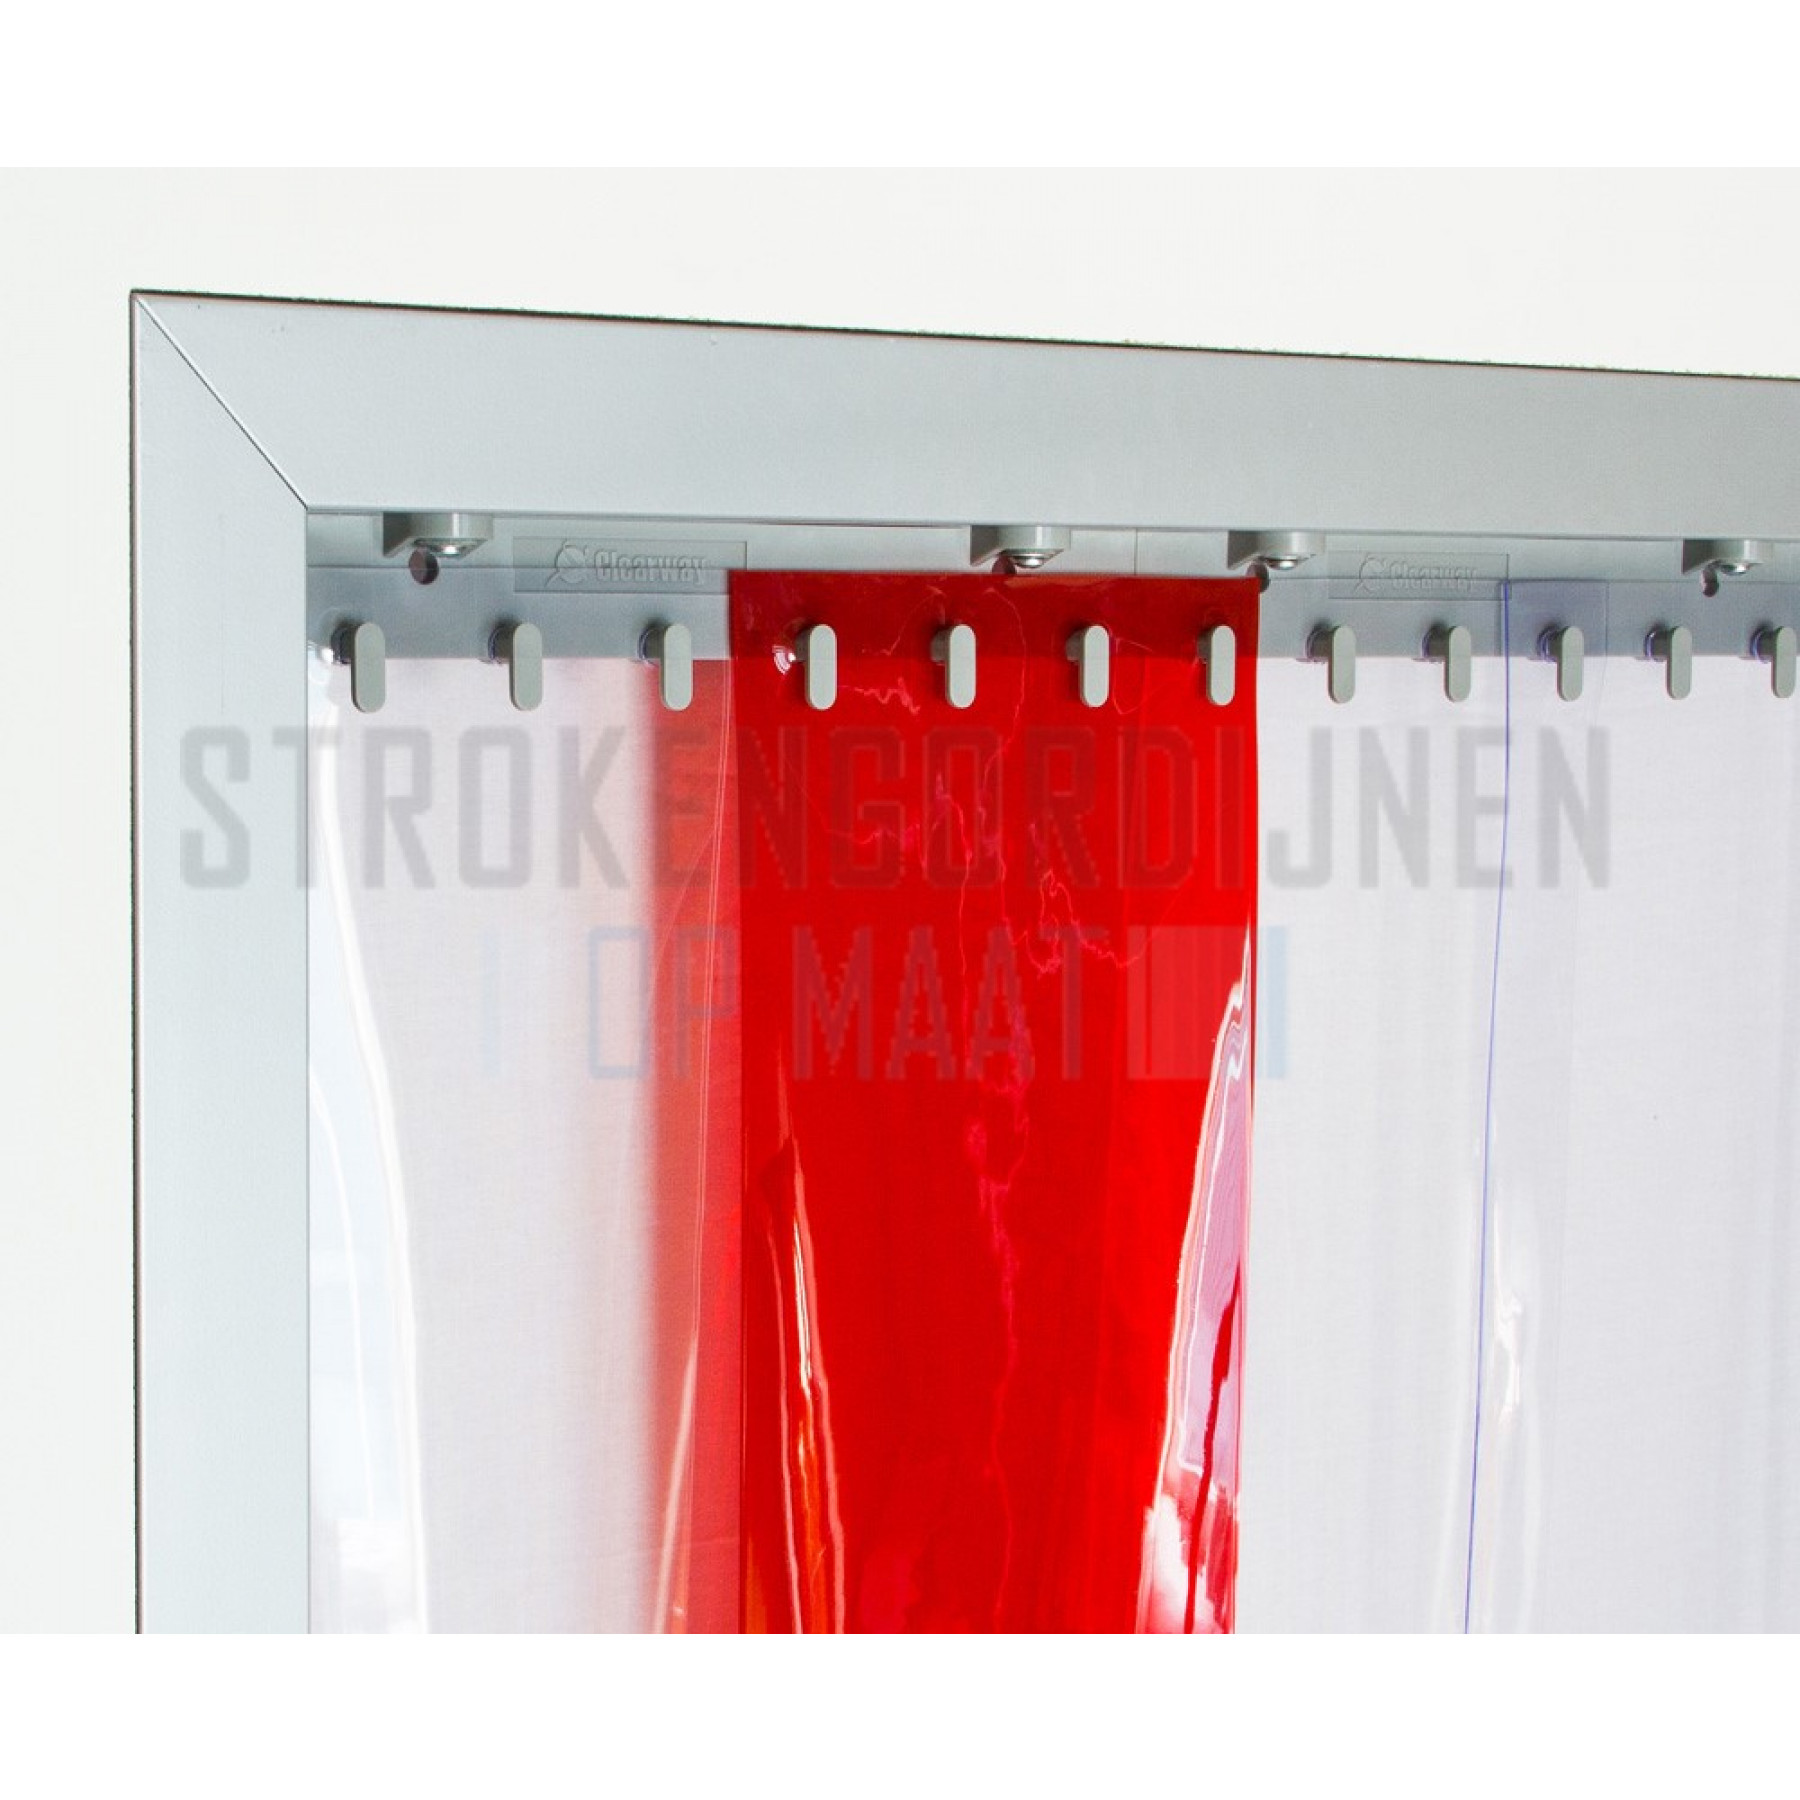 PVC Rolle, 200mm breit, 2mm dick, 50 Meter lang, Farbe Rot, transparent